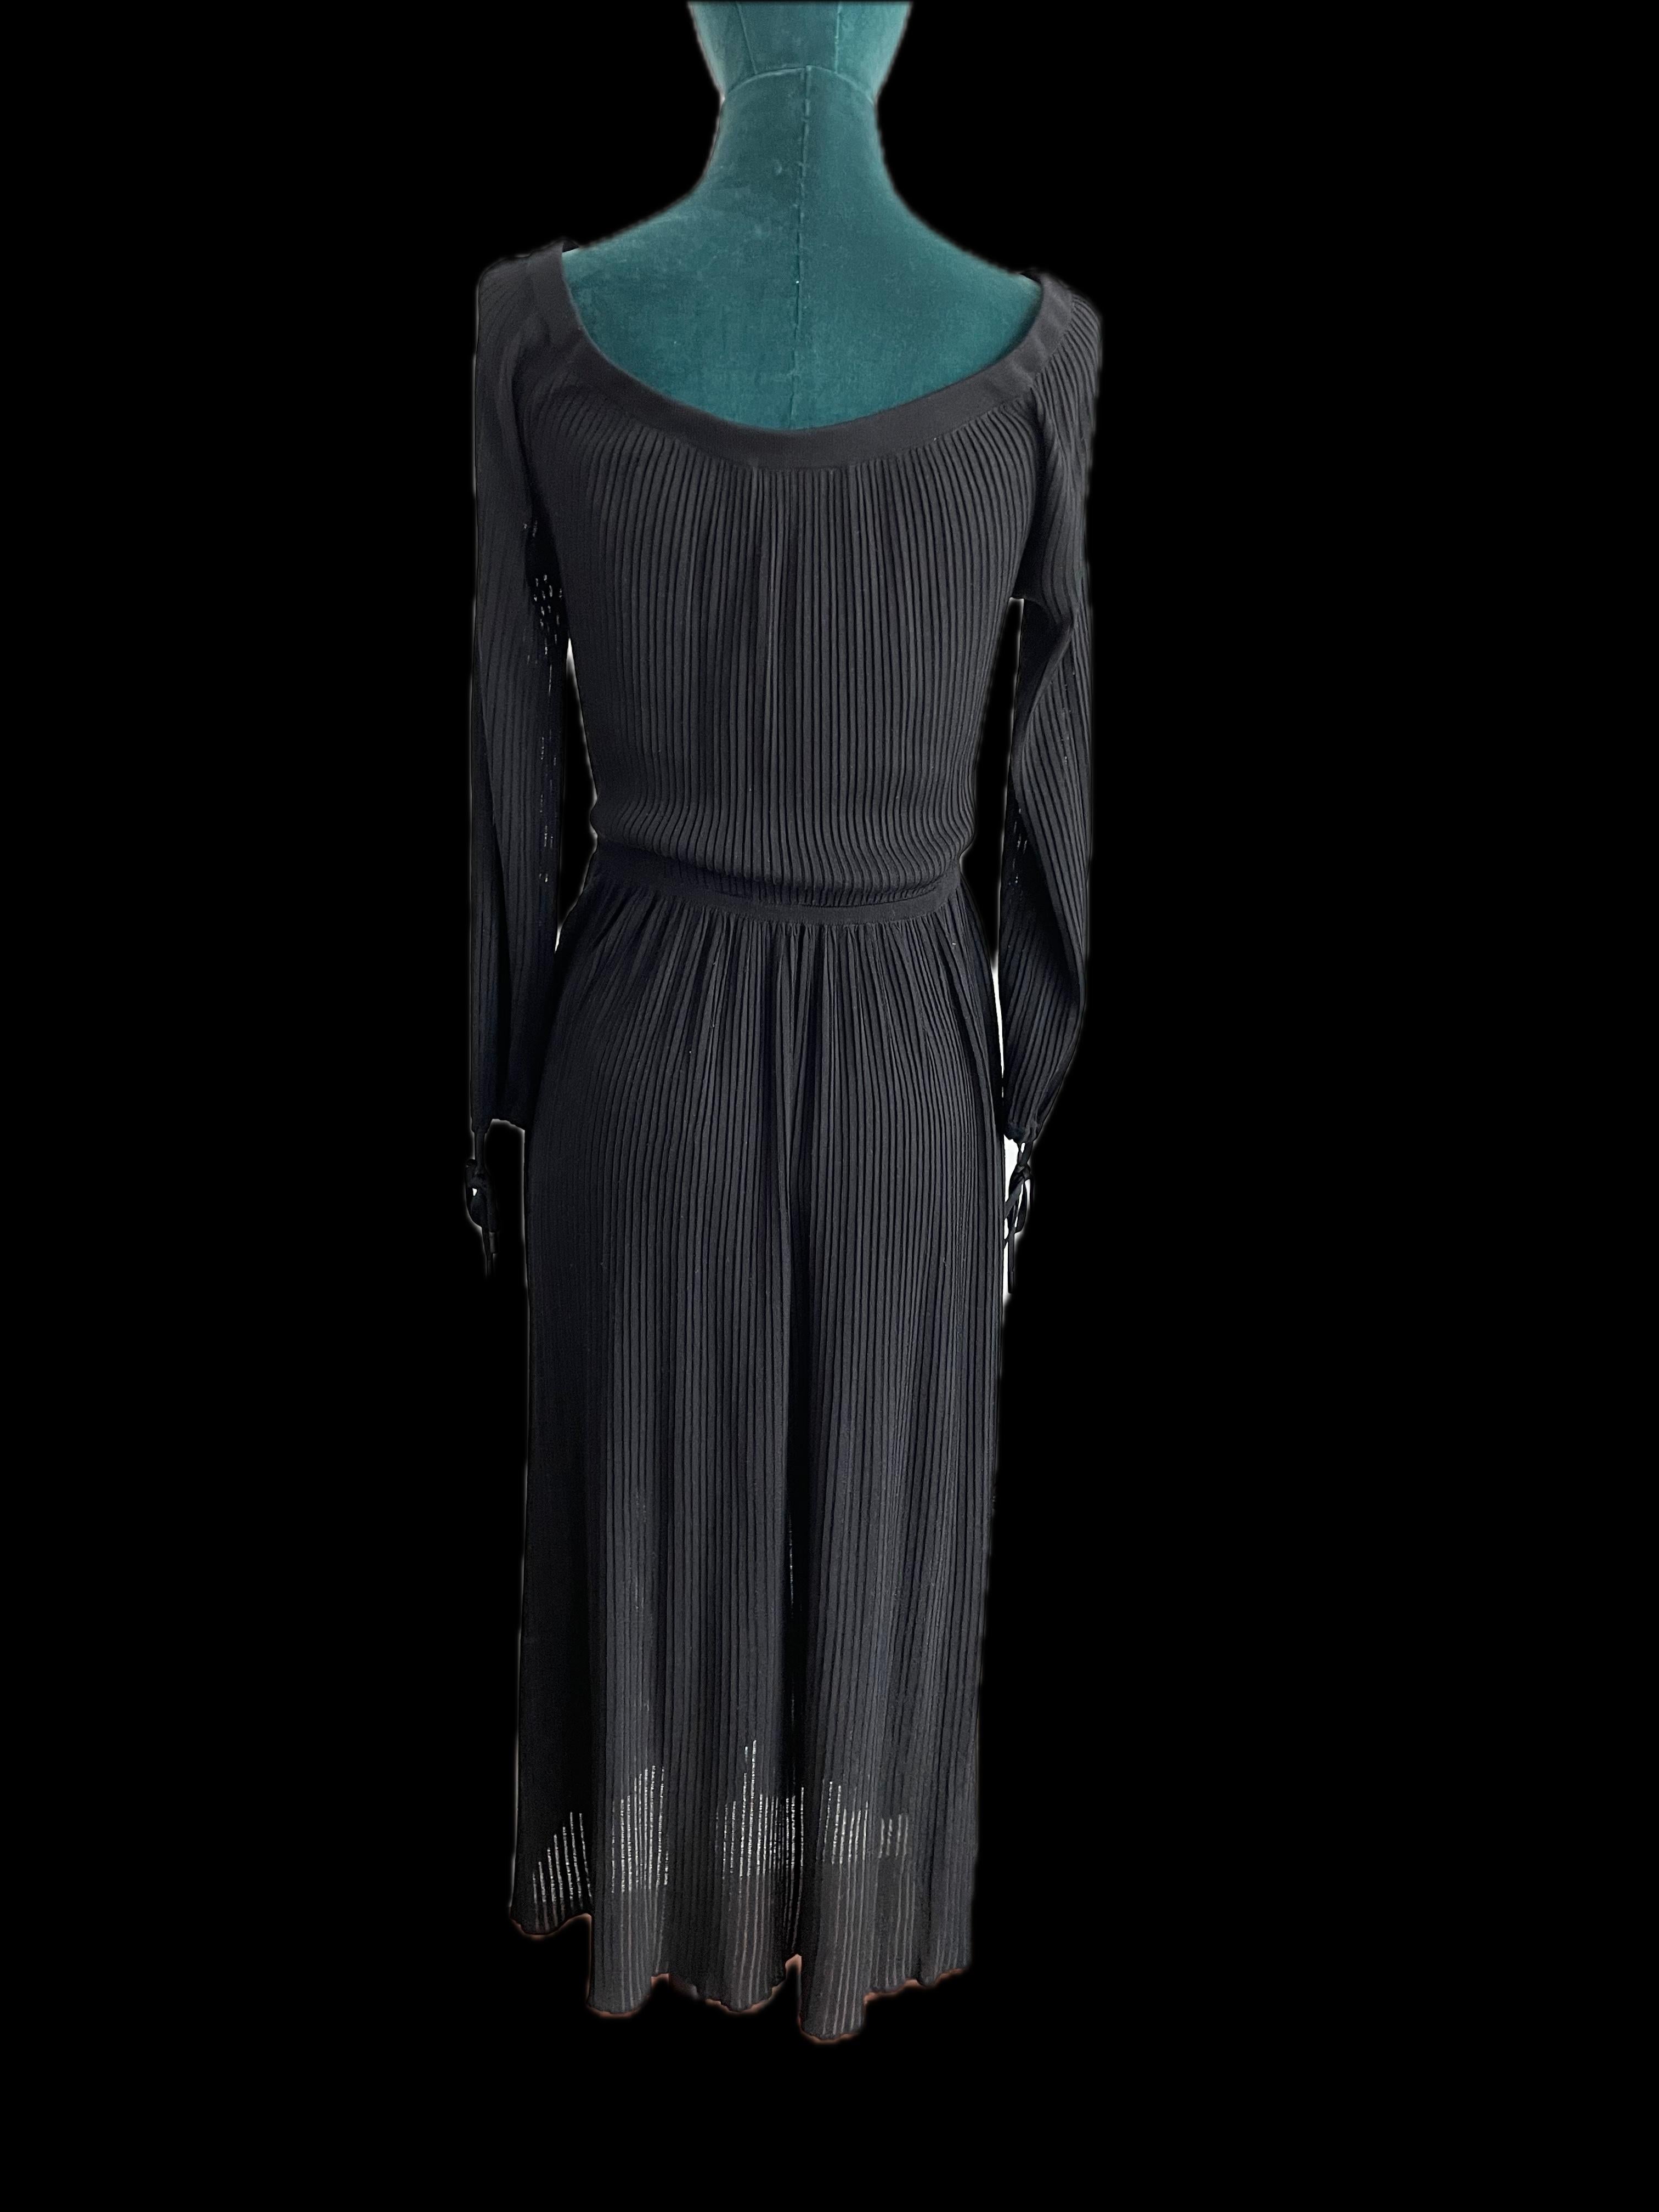 Gabriela Hearts Black  Dress with tight sleeve  In Excellent Condition For Sale In Toronto, CA